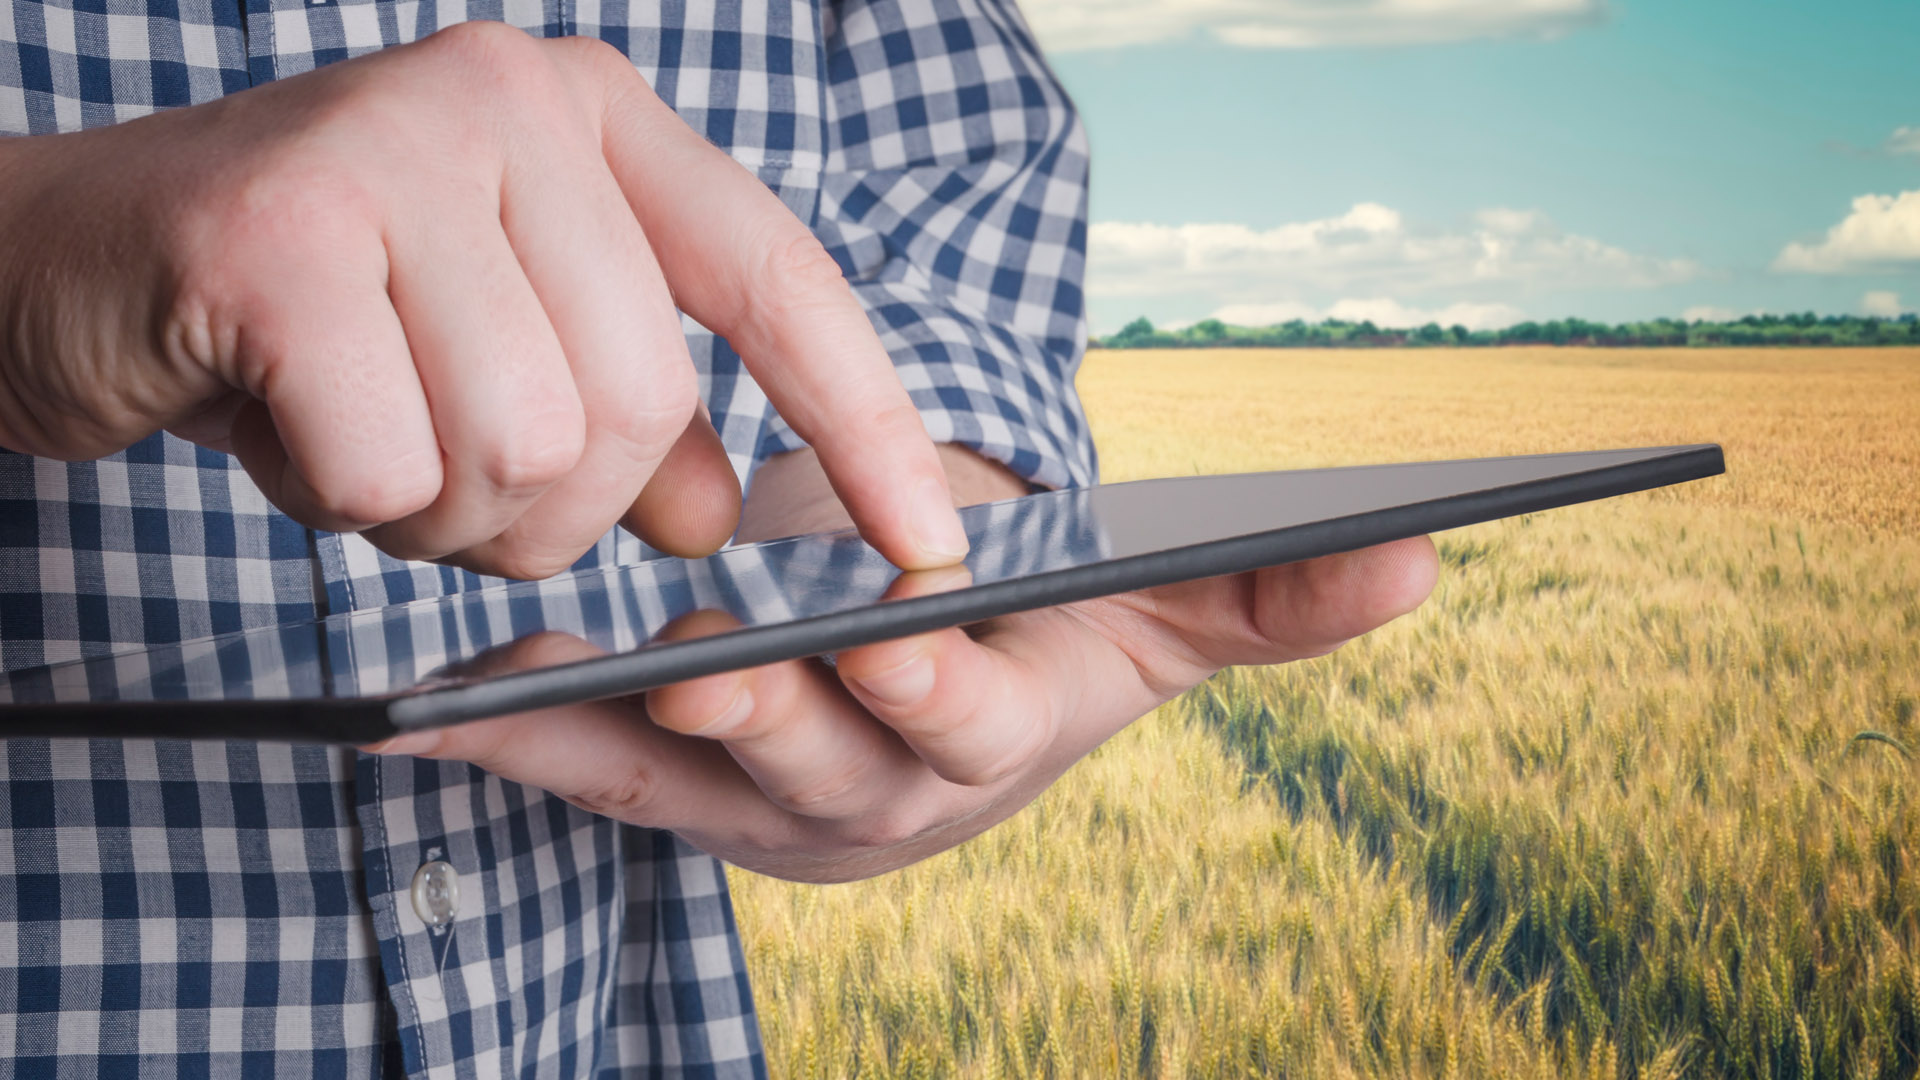 Policy Progress: The American Chamber of Commerce in Ukraine Welcomes the Step Towards Digitalization in Agricultural Sphere